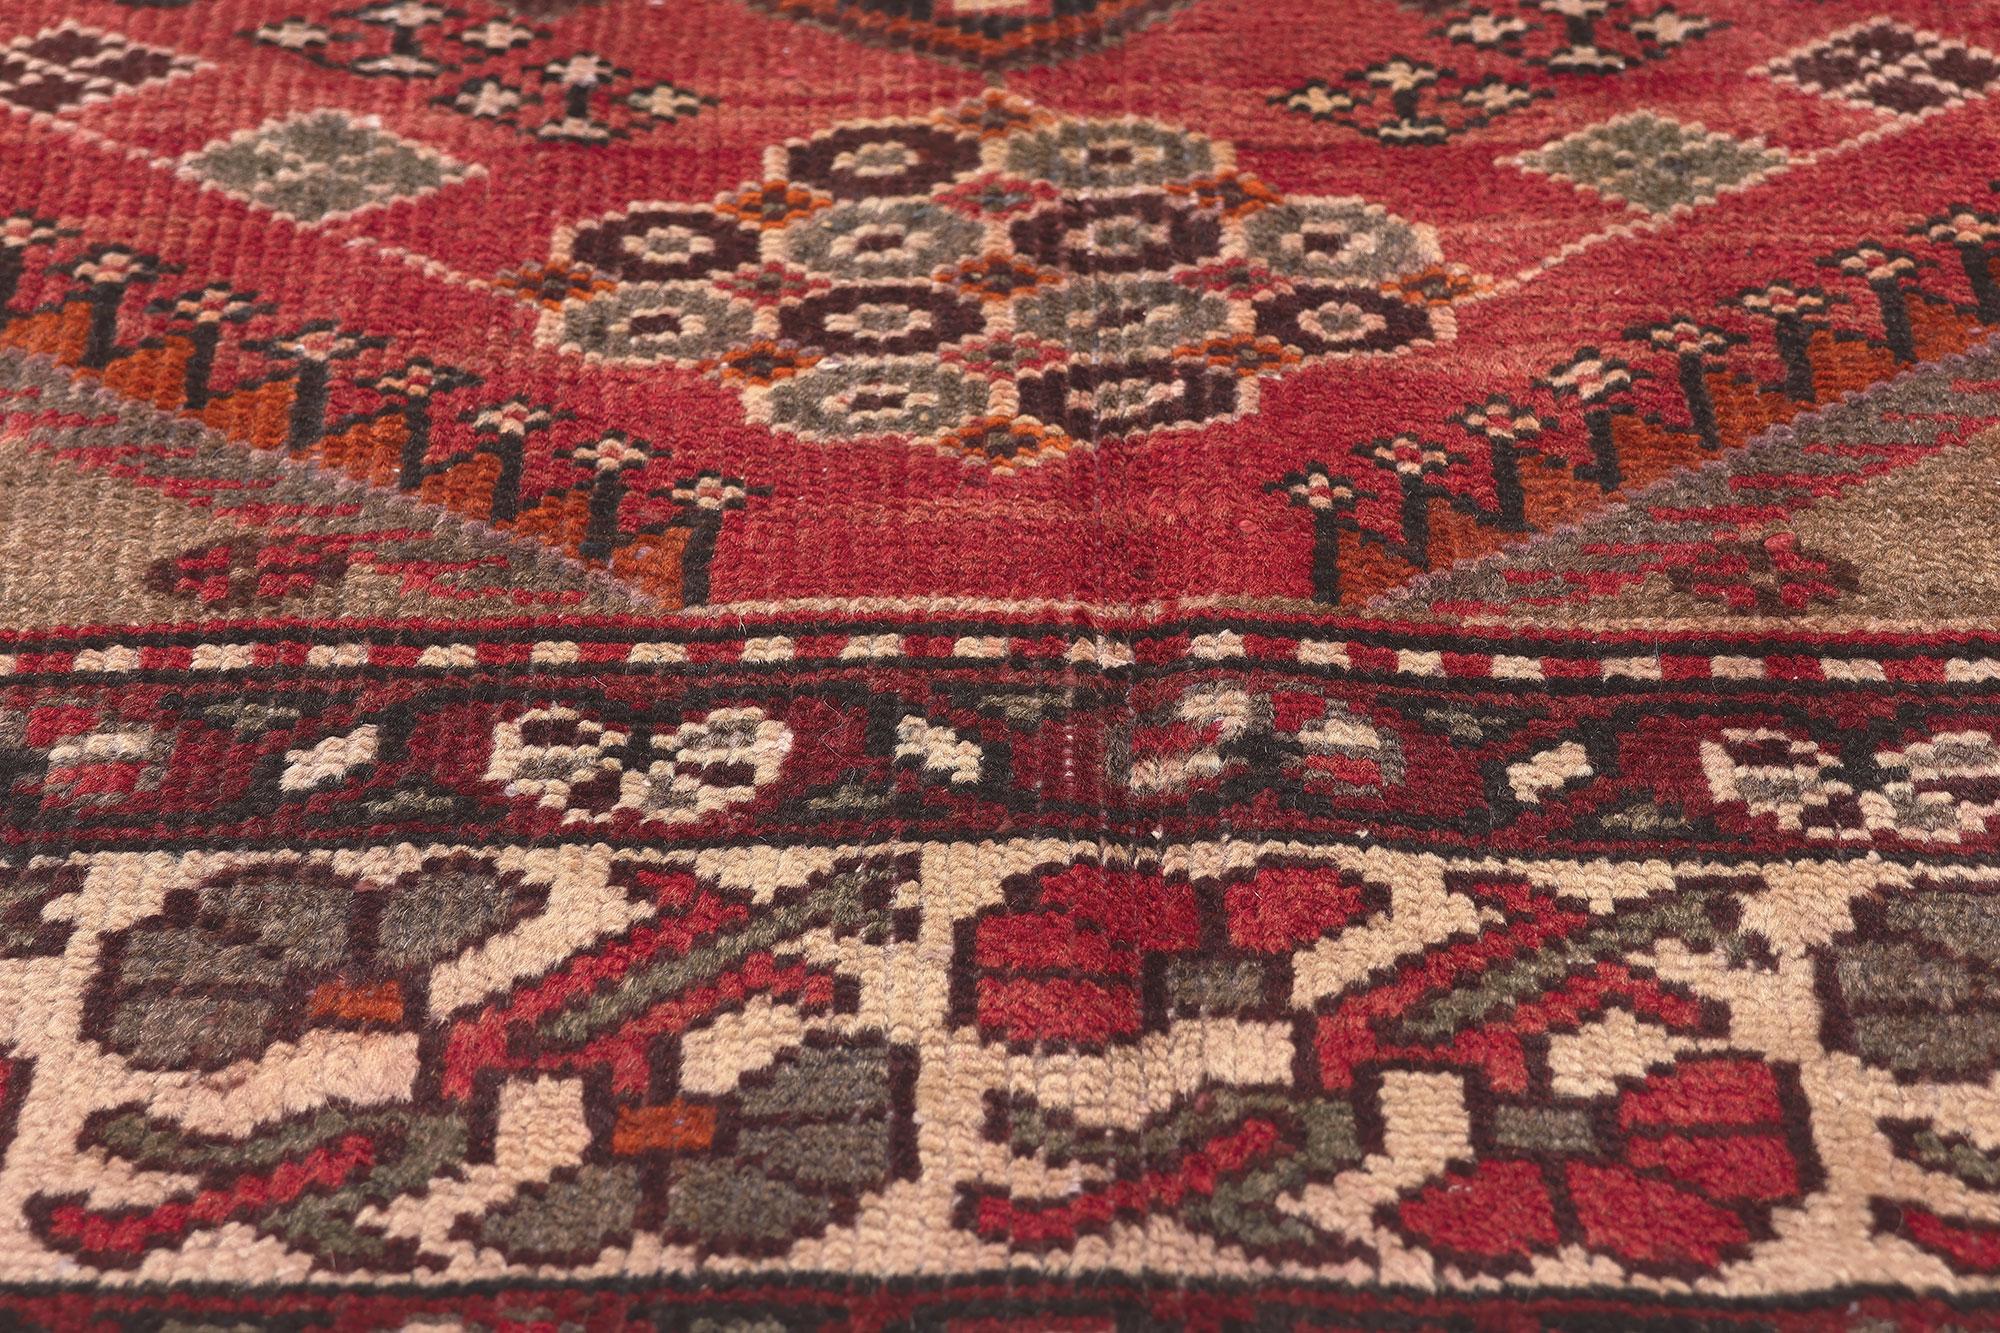 Vintage Persian Hamadan Rug, Nomadic Charm Meets Decidedly Dramatic In Good Condition For Sale In Dallas, TX